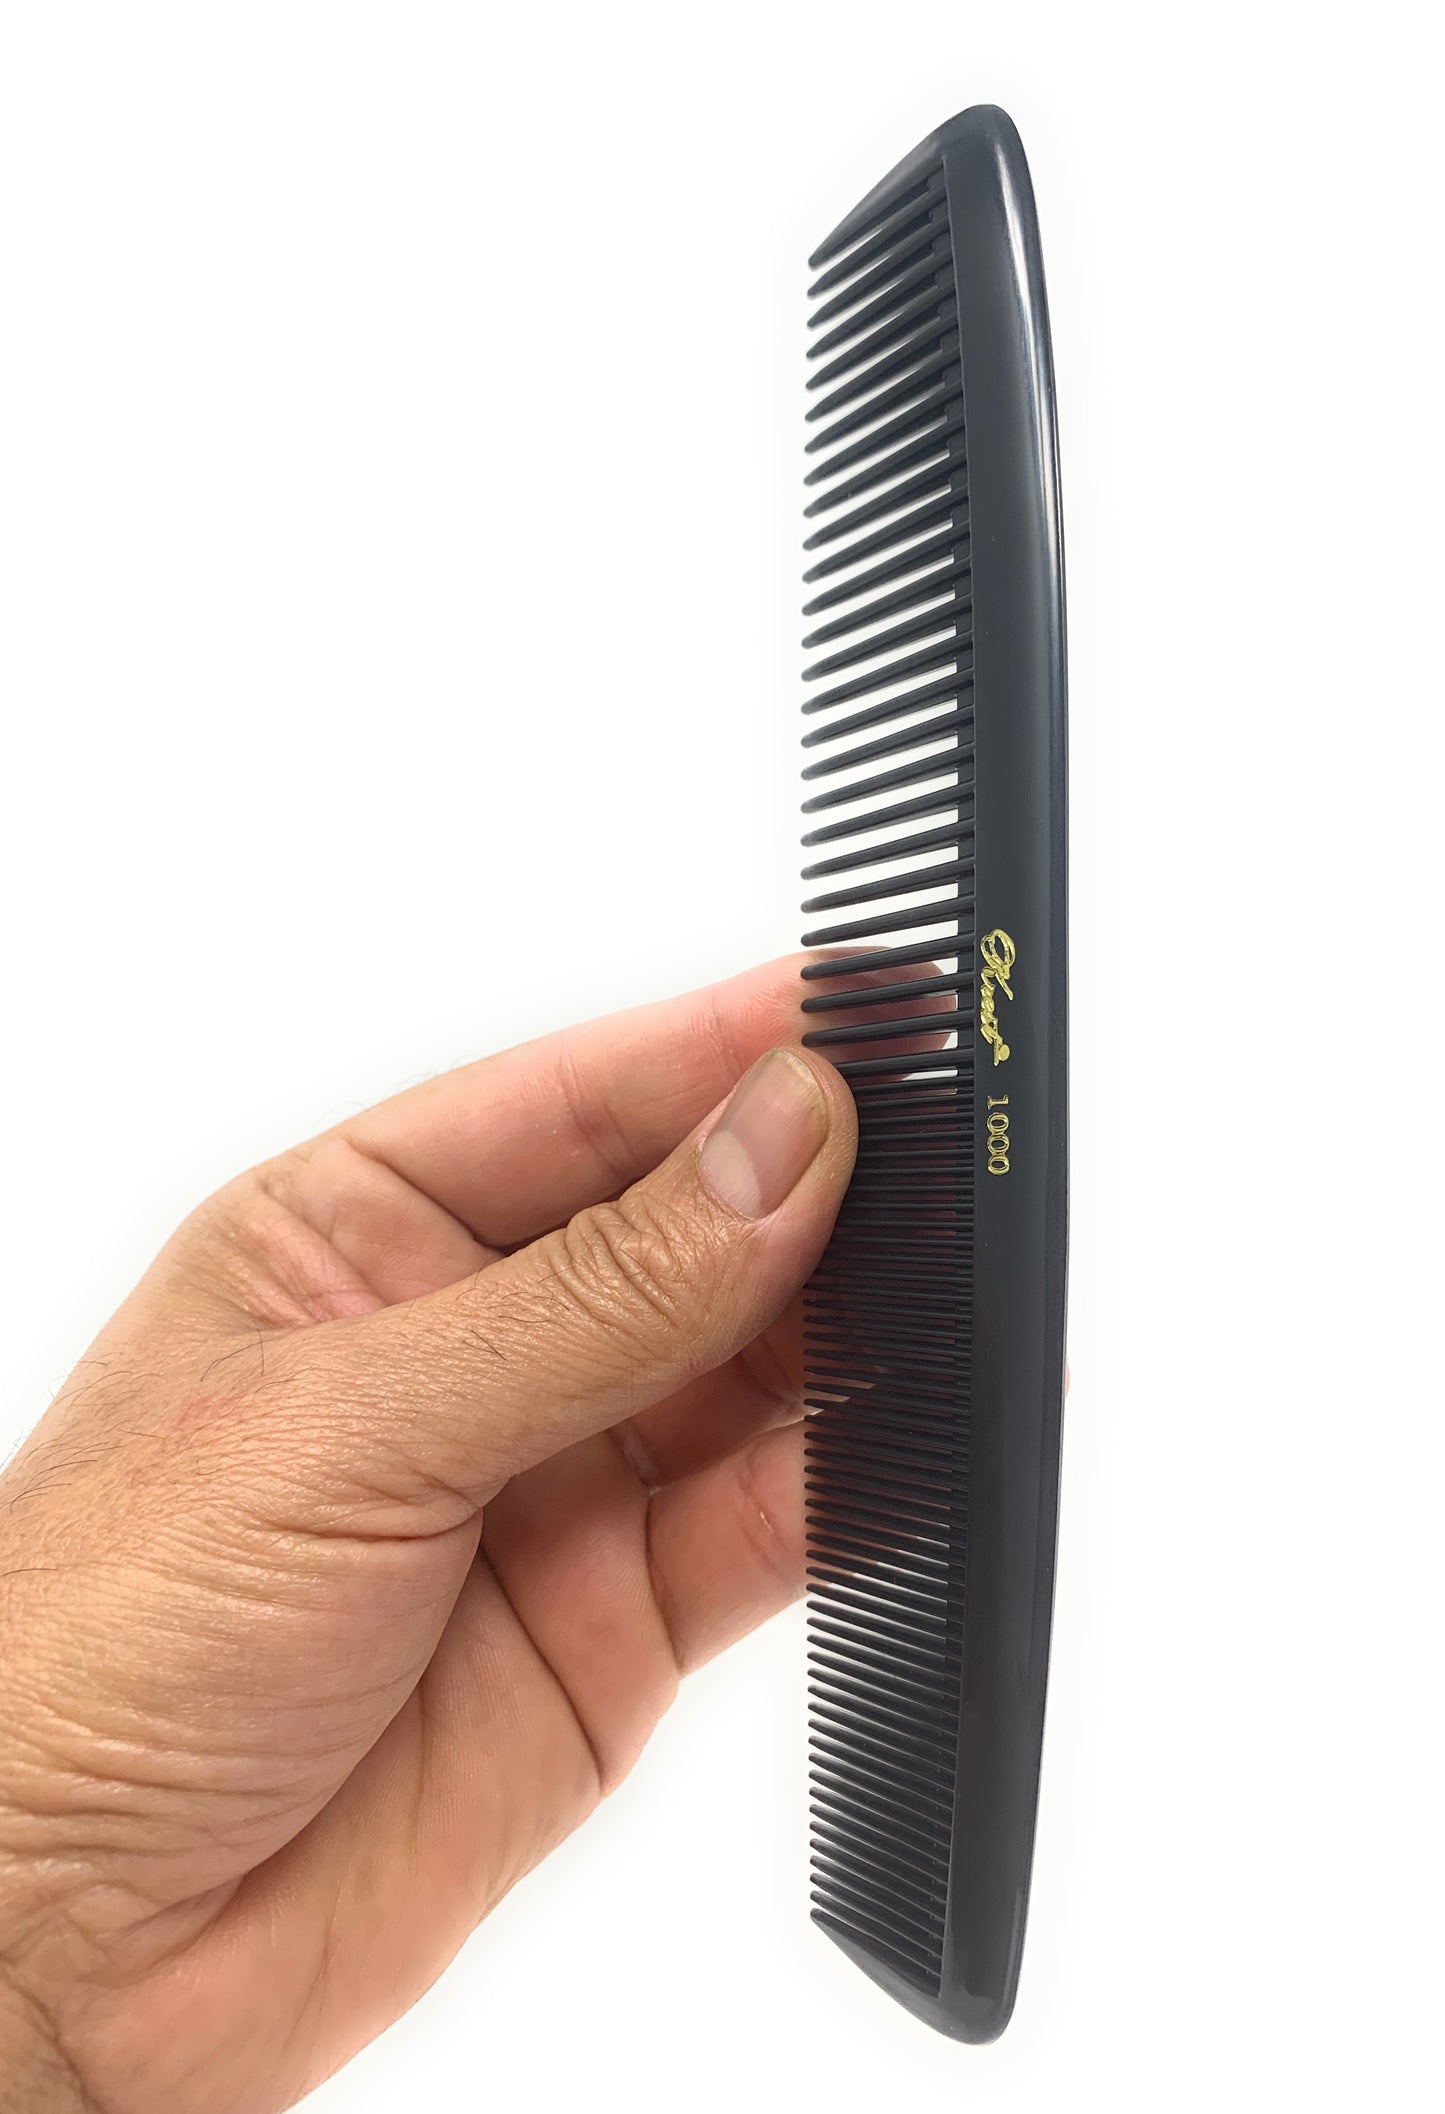 Krest 8.5 Inch 1000 Specialty Hair Combs Round Master Waver Cutting Comb Black 1pc.